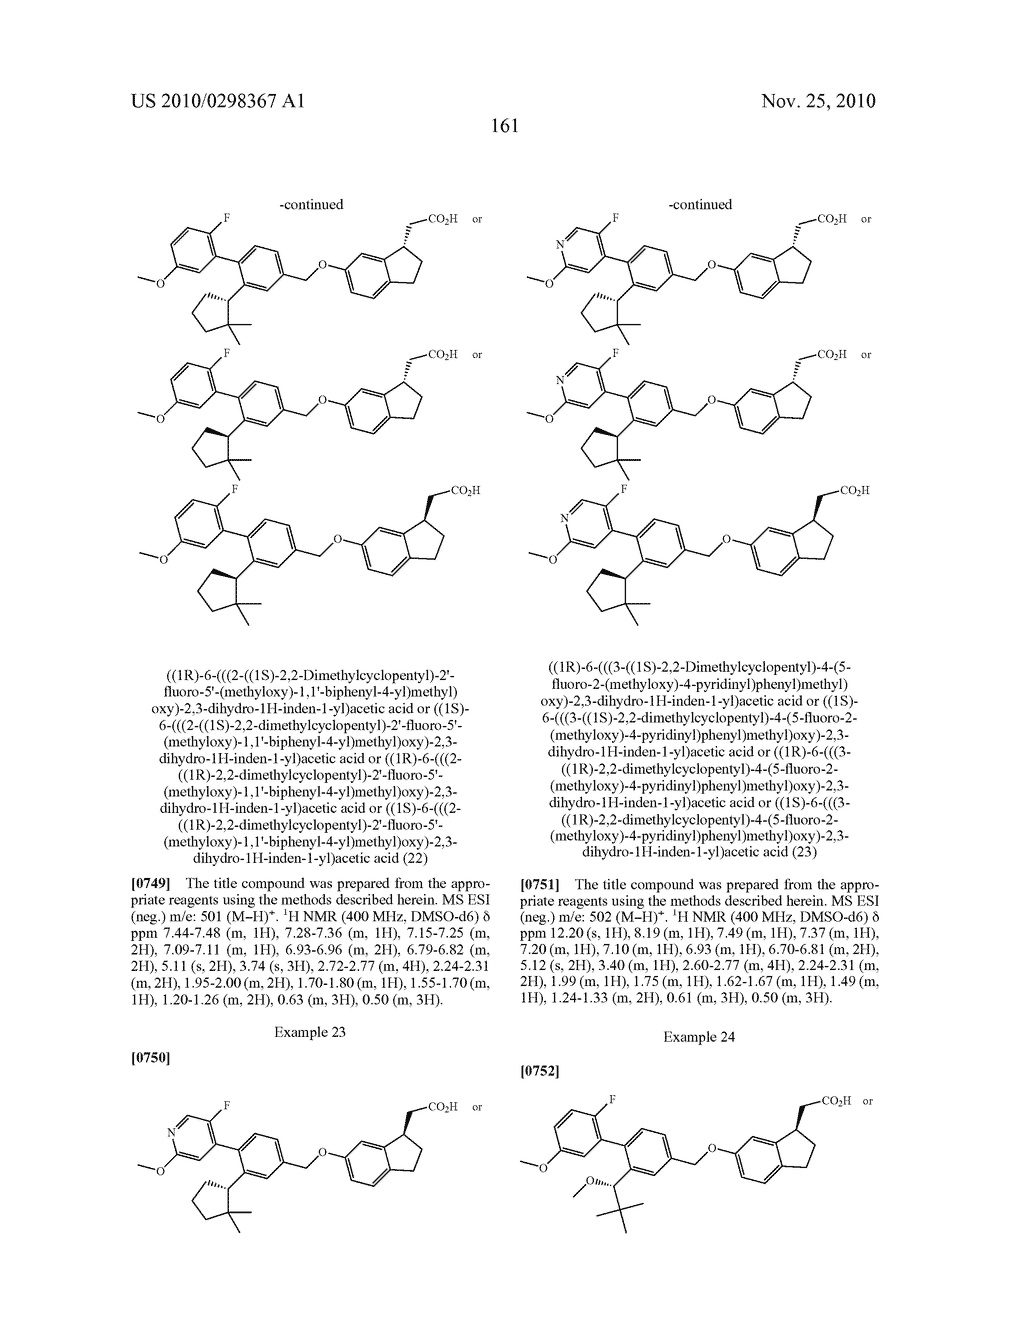 Conformationally Constrained Carboxylic Acid Derivatives Useful for Treating Metabolic Disorders - diagram, schematic, and image 163